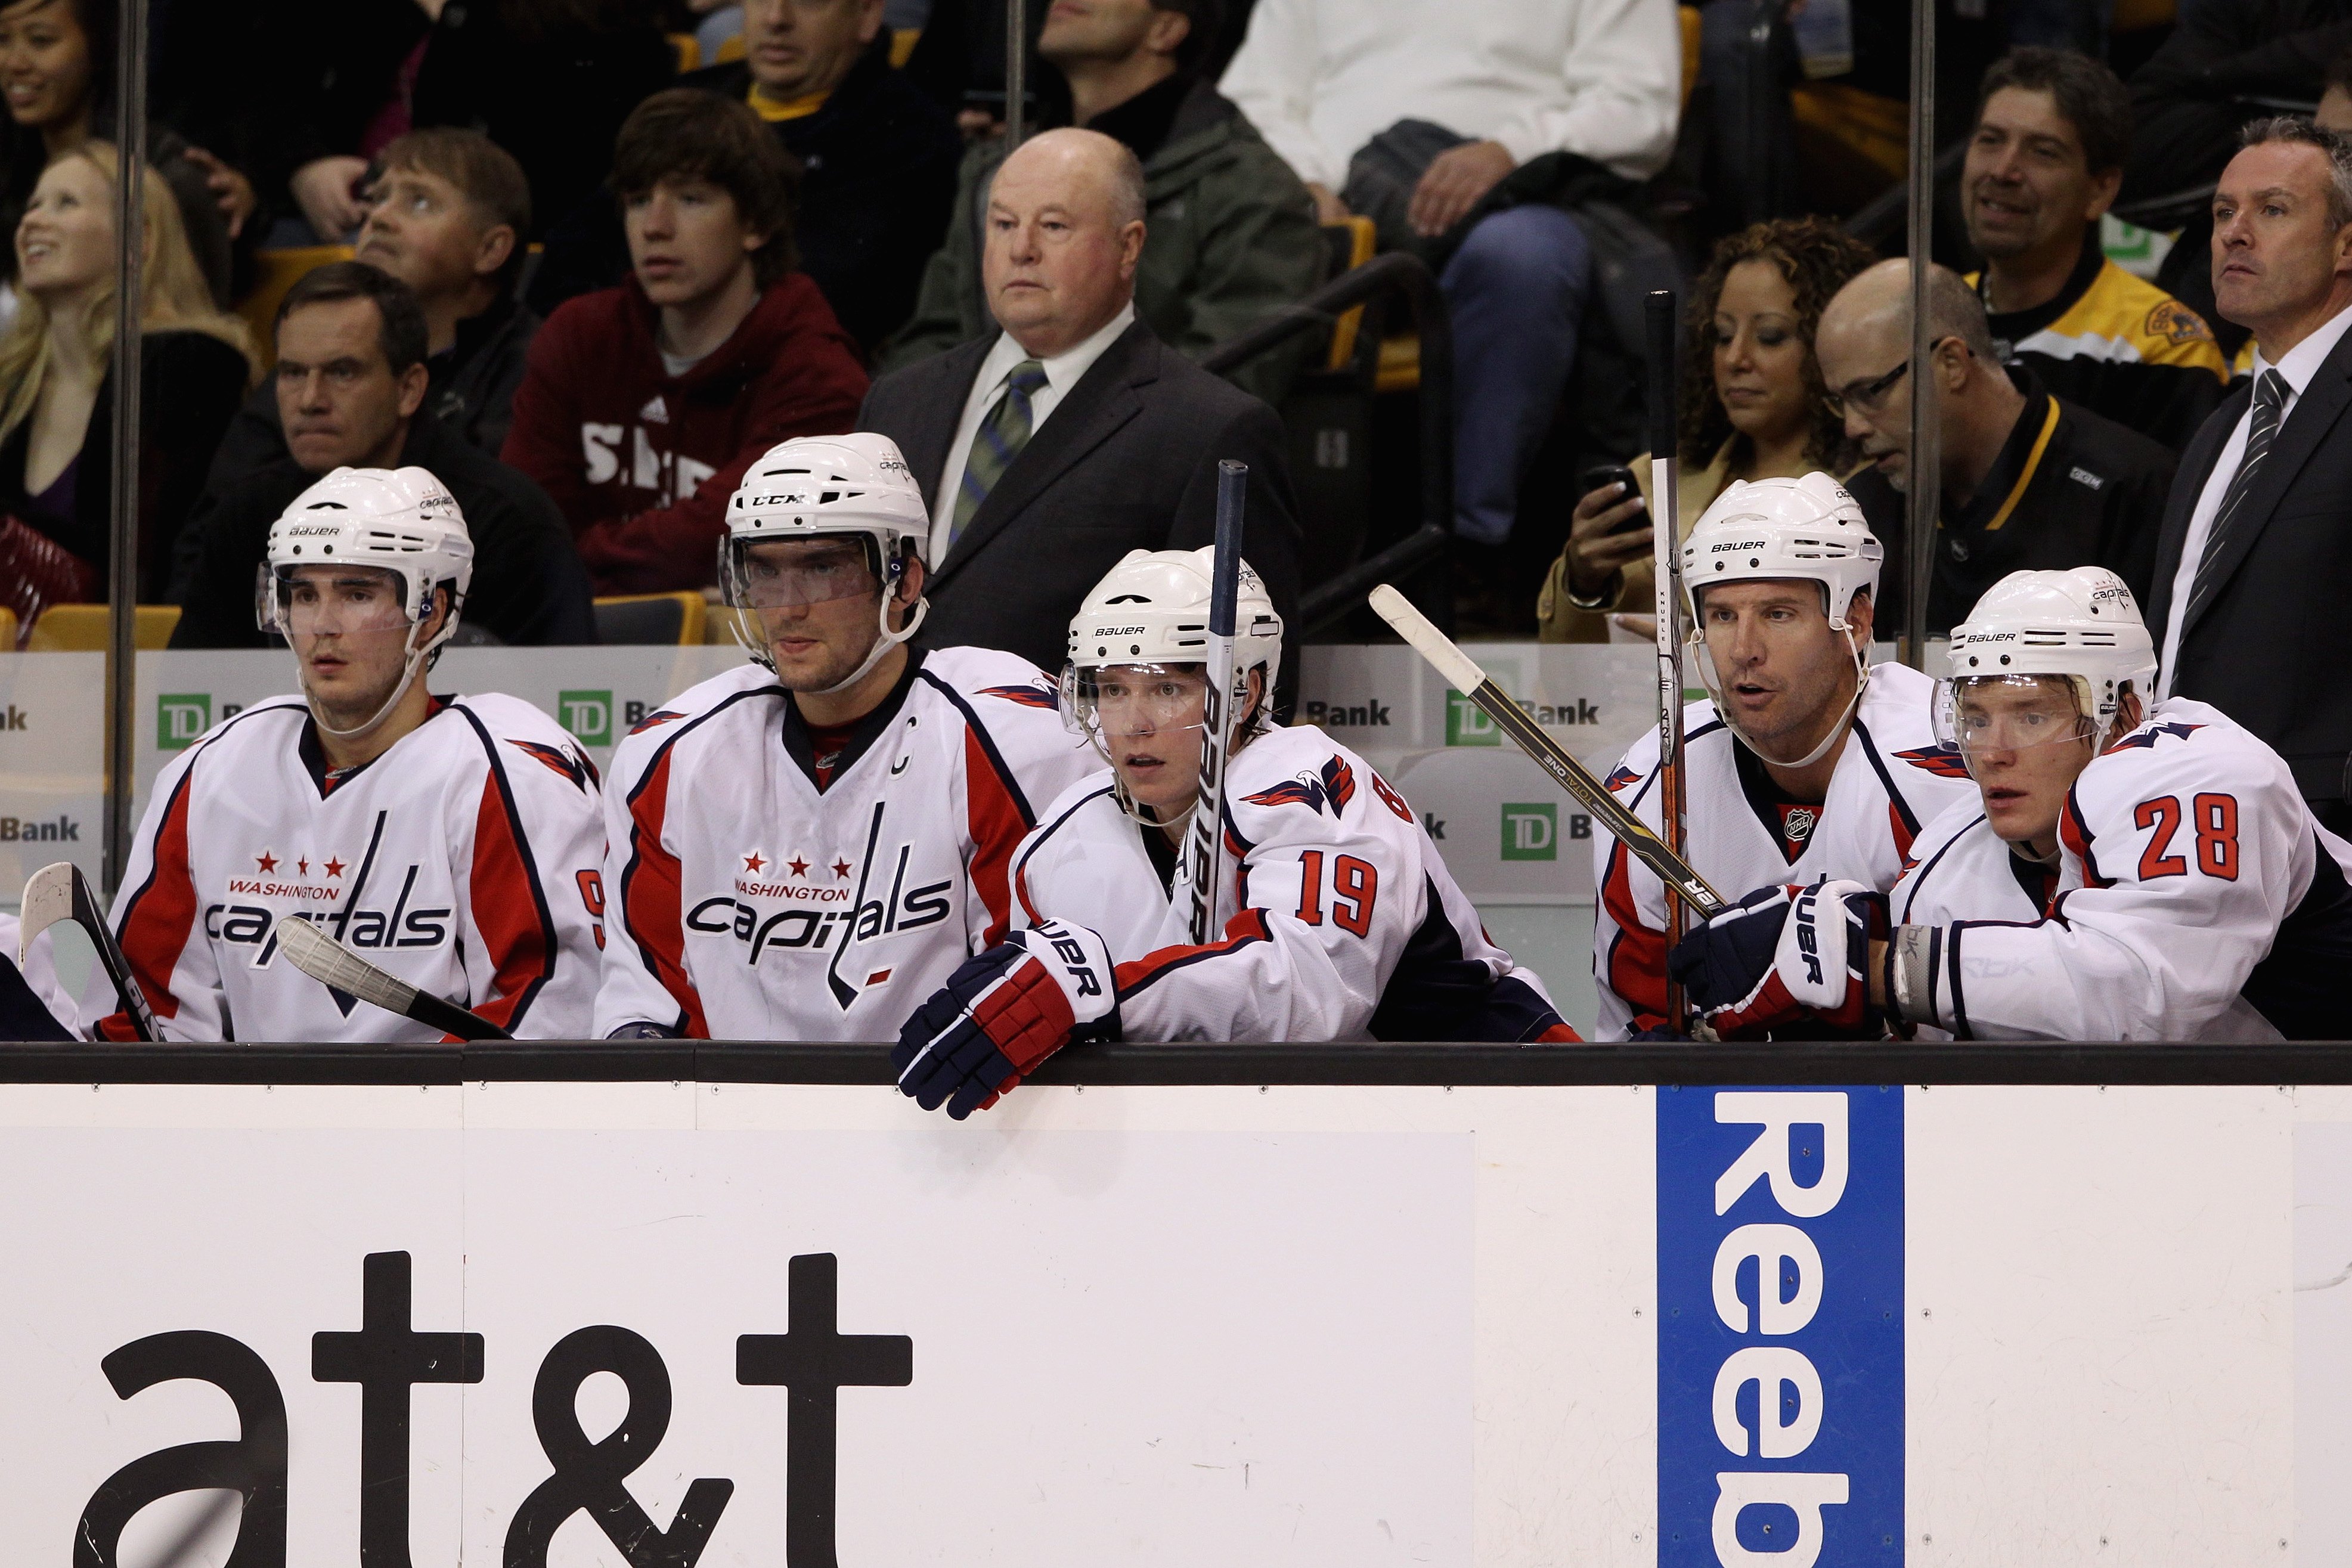 BOSTON - OCTOBER 21:  Head coach Bruce Boudreau of the Washington Capitals and (l-r) Marcus Johansson #90, Alex Ovechkin #8, Nicklas Backstrom #19, Mike Knuble #22, Alexander Semin #28 and assistant coach Dean Evason look on from the bench against the Bos